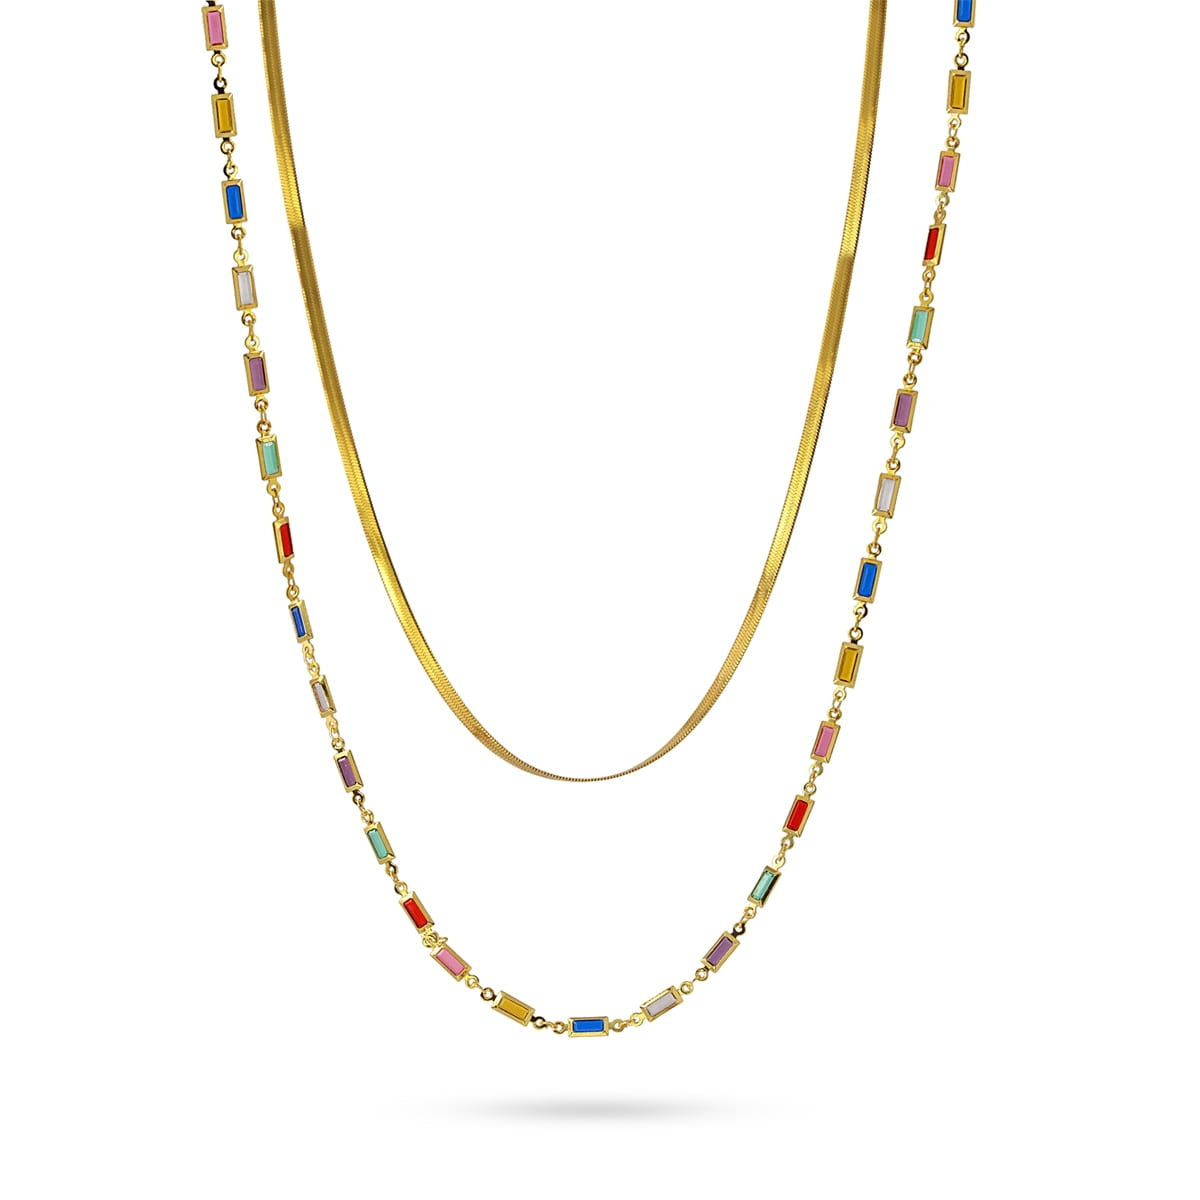 Talaier long necklace